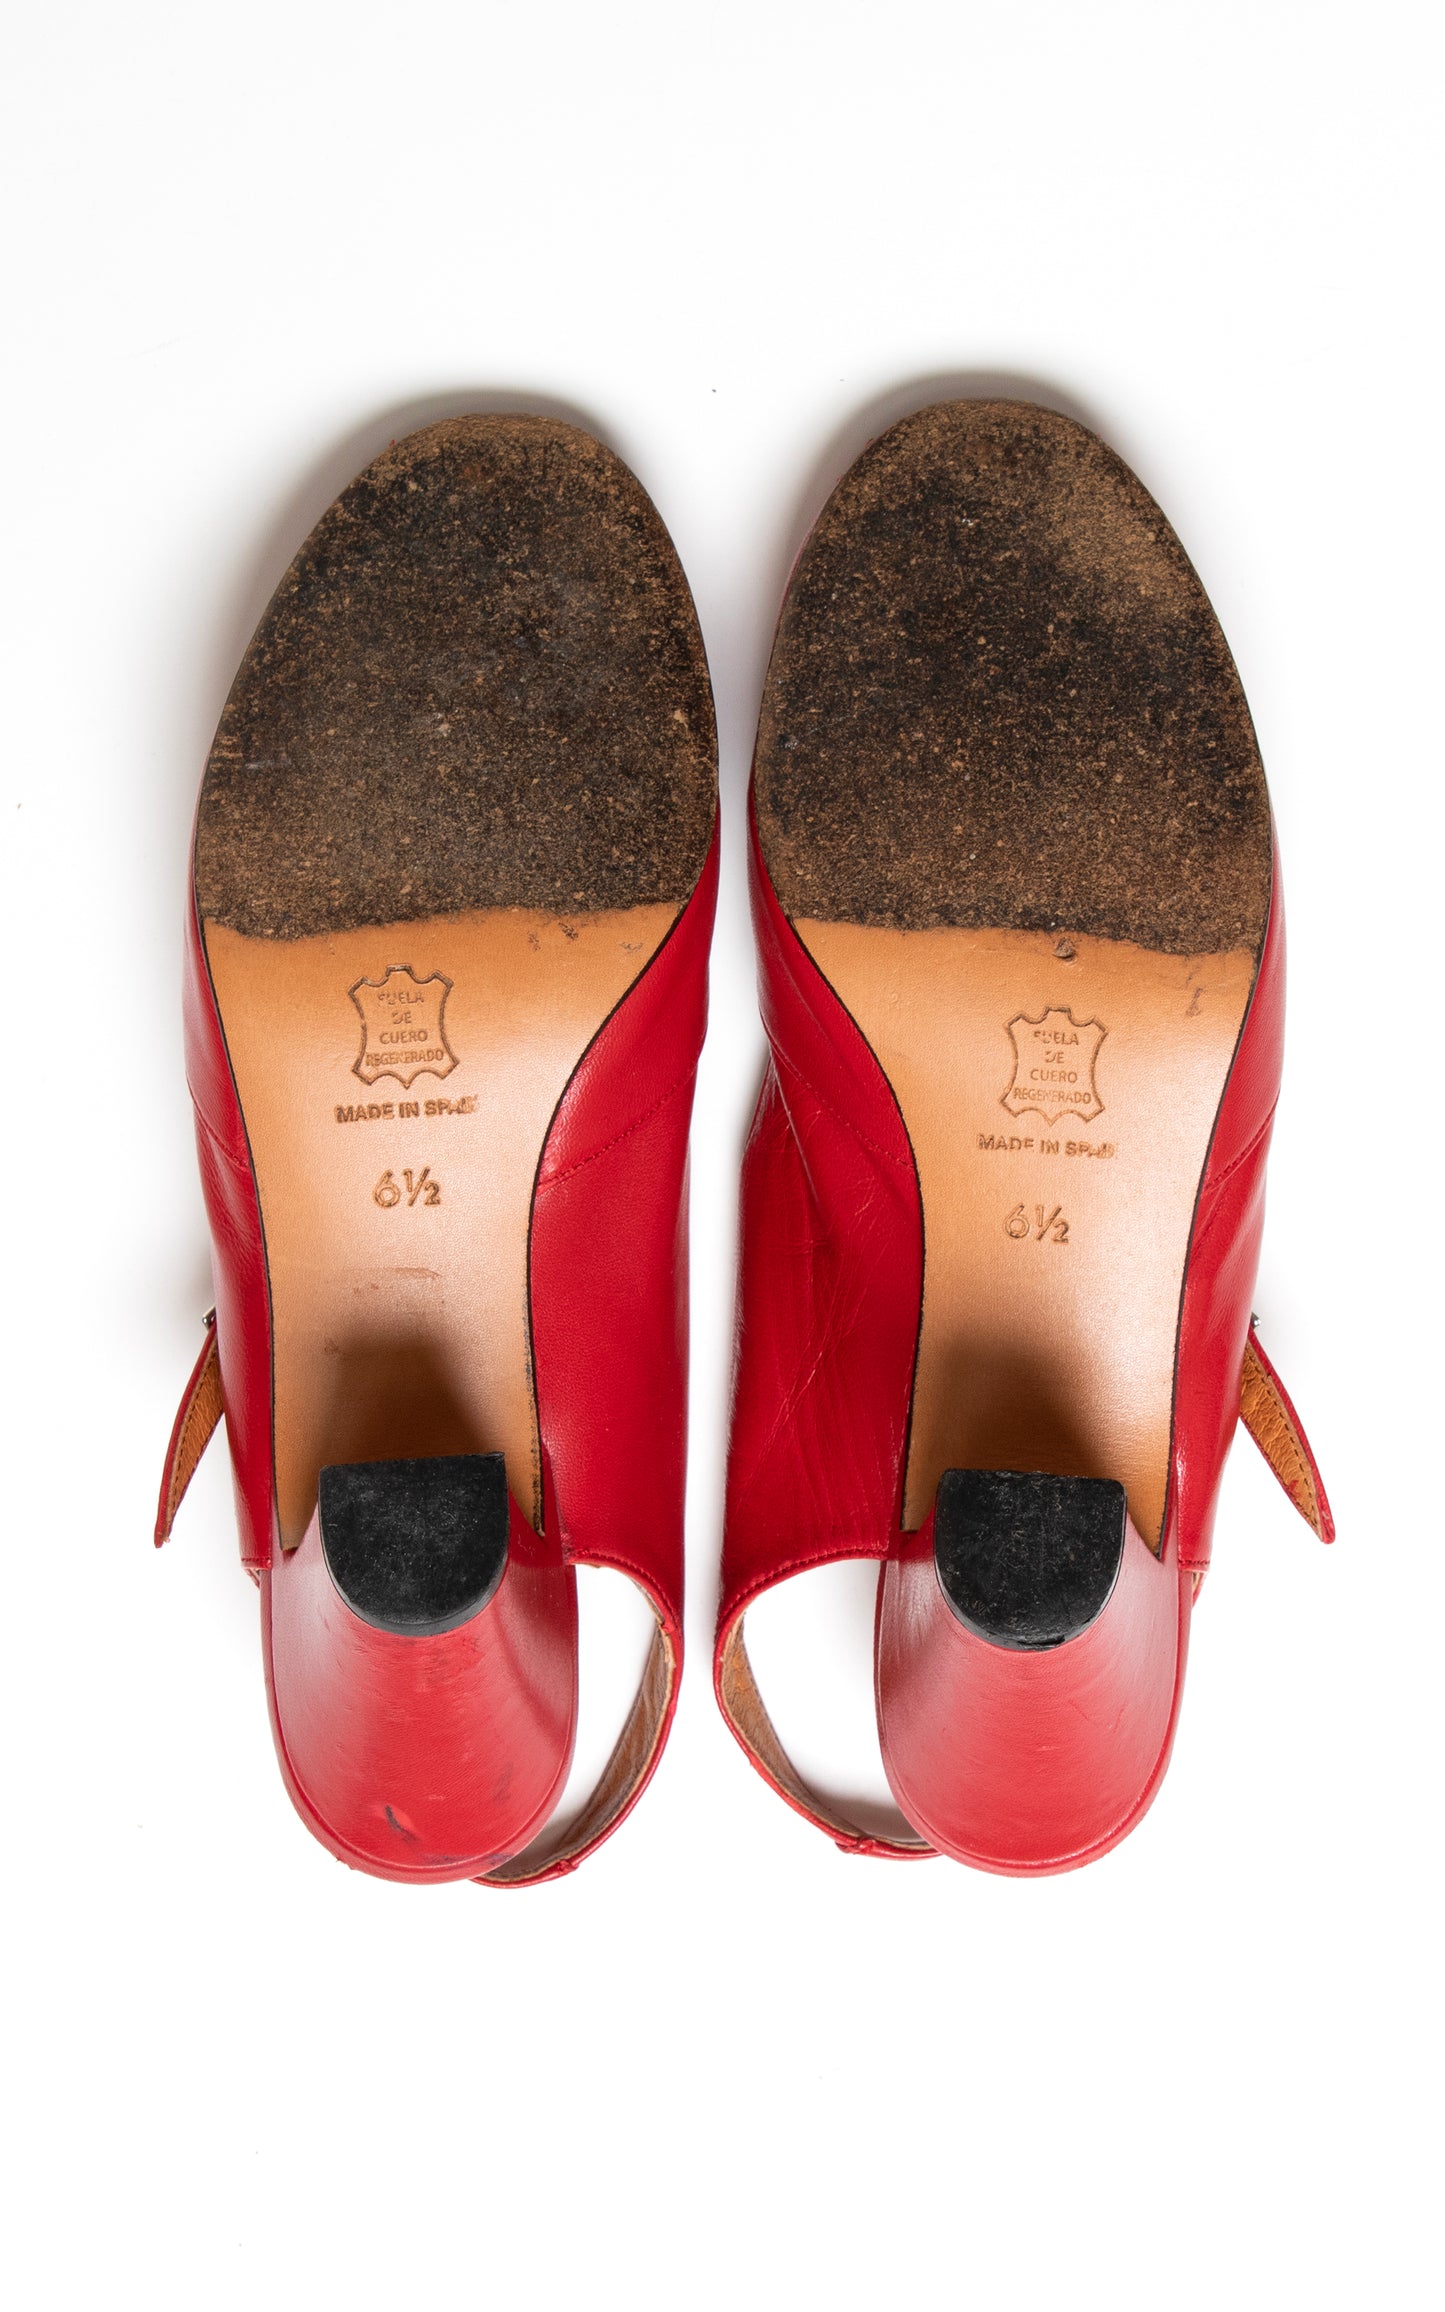 Modern RE-MIX Red Leather "Anita" Heels | size US 6.5